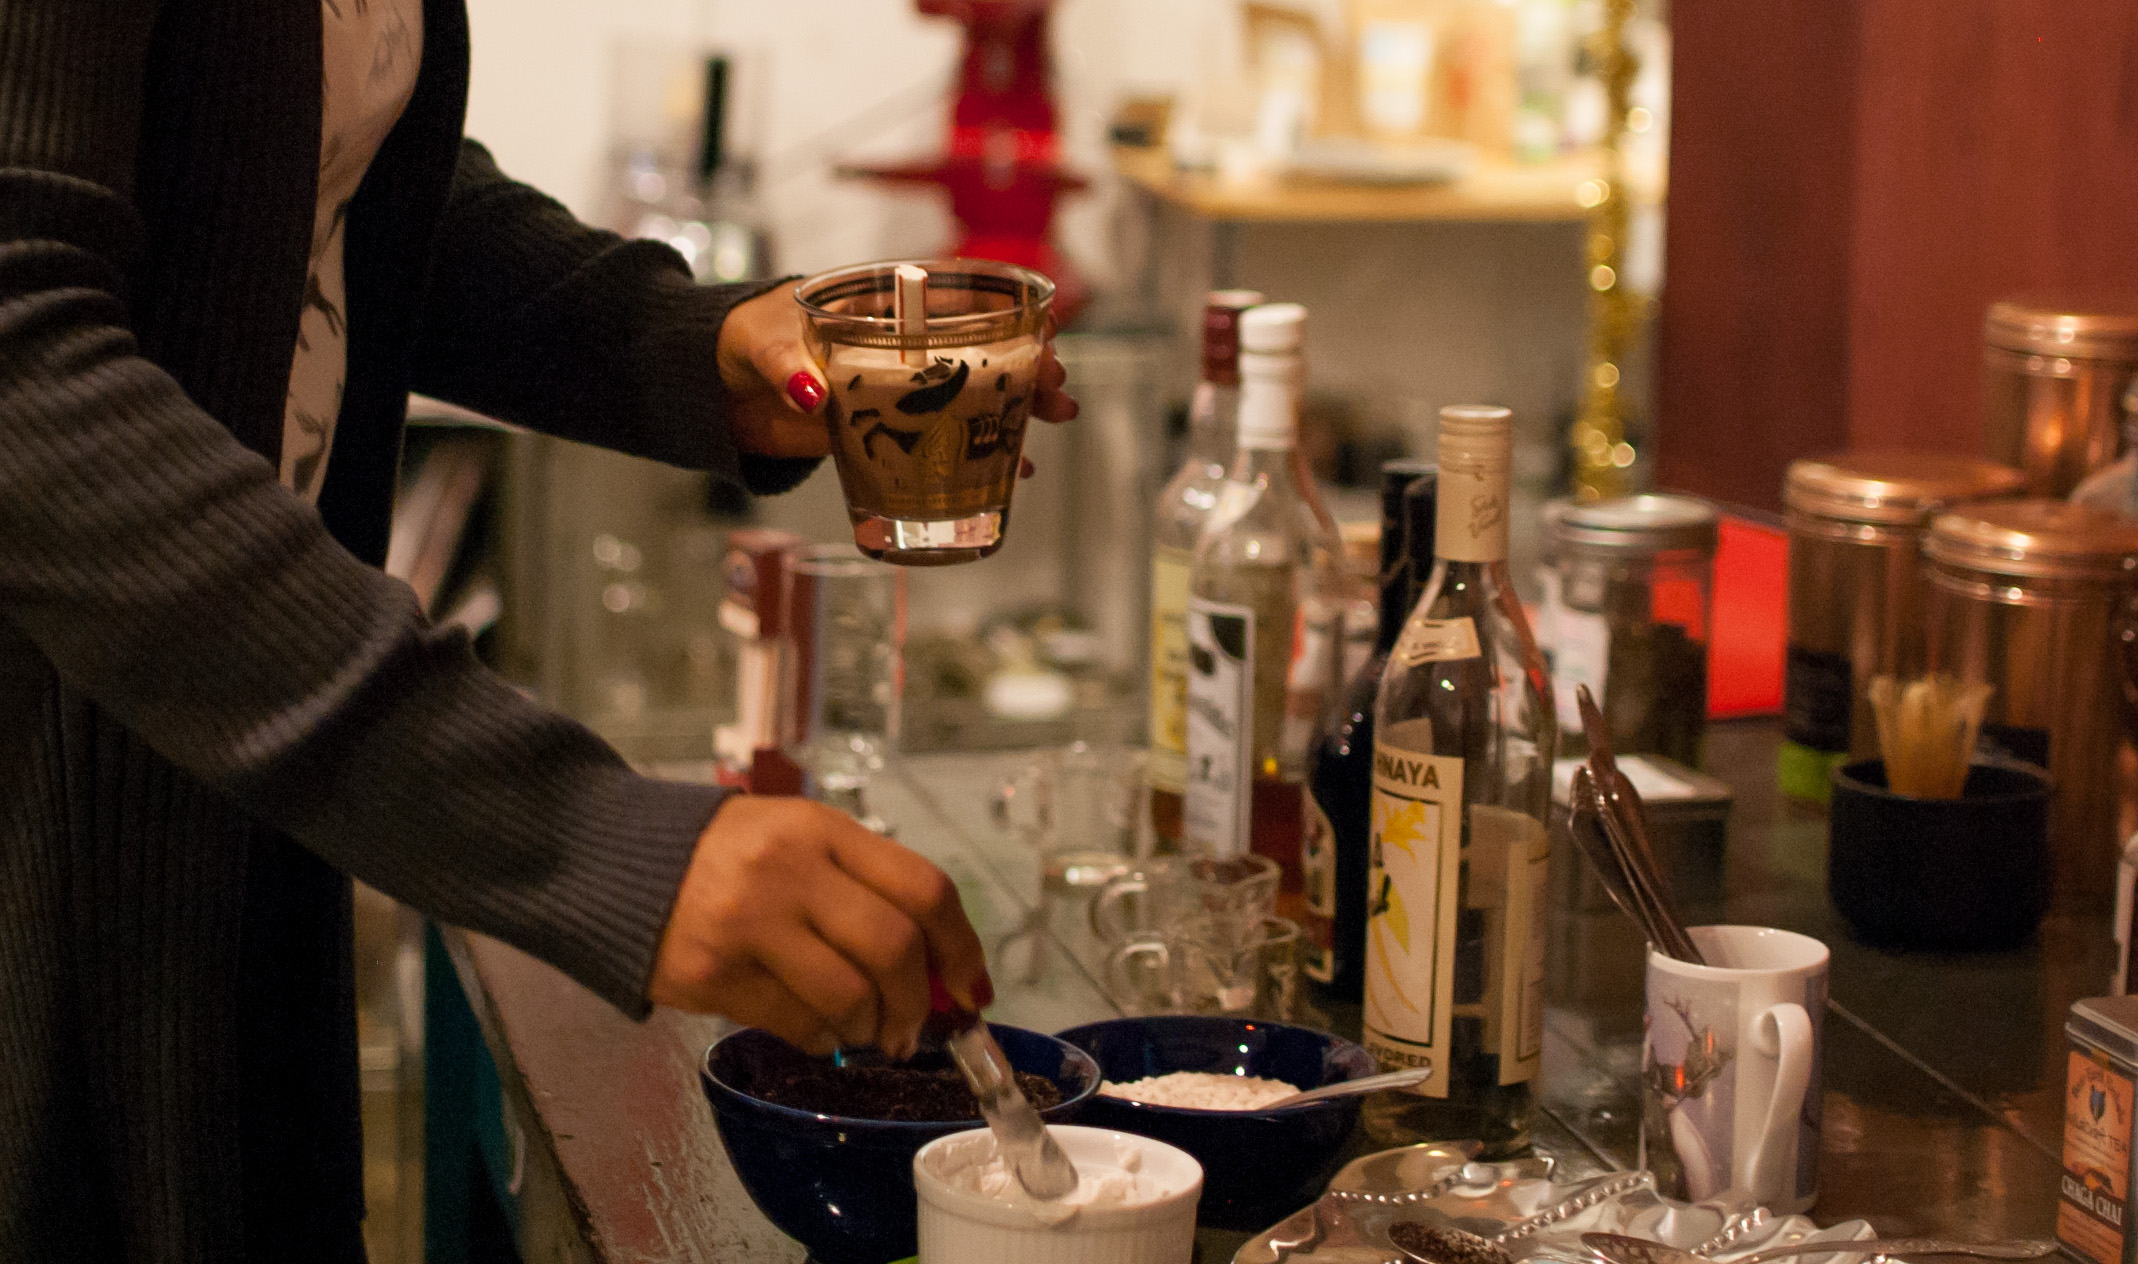 a hot cocoa bar equipped with peppermint stir sticks, crushed candy canes, cookies, coconut cream, and...booze!